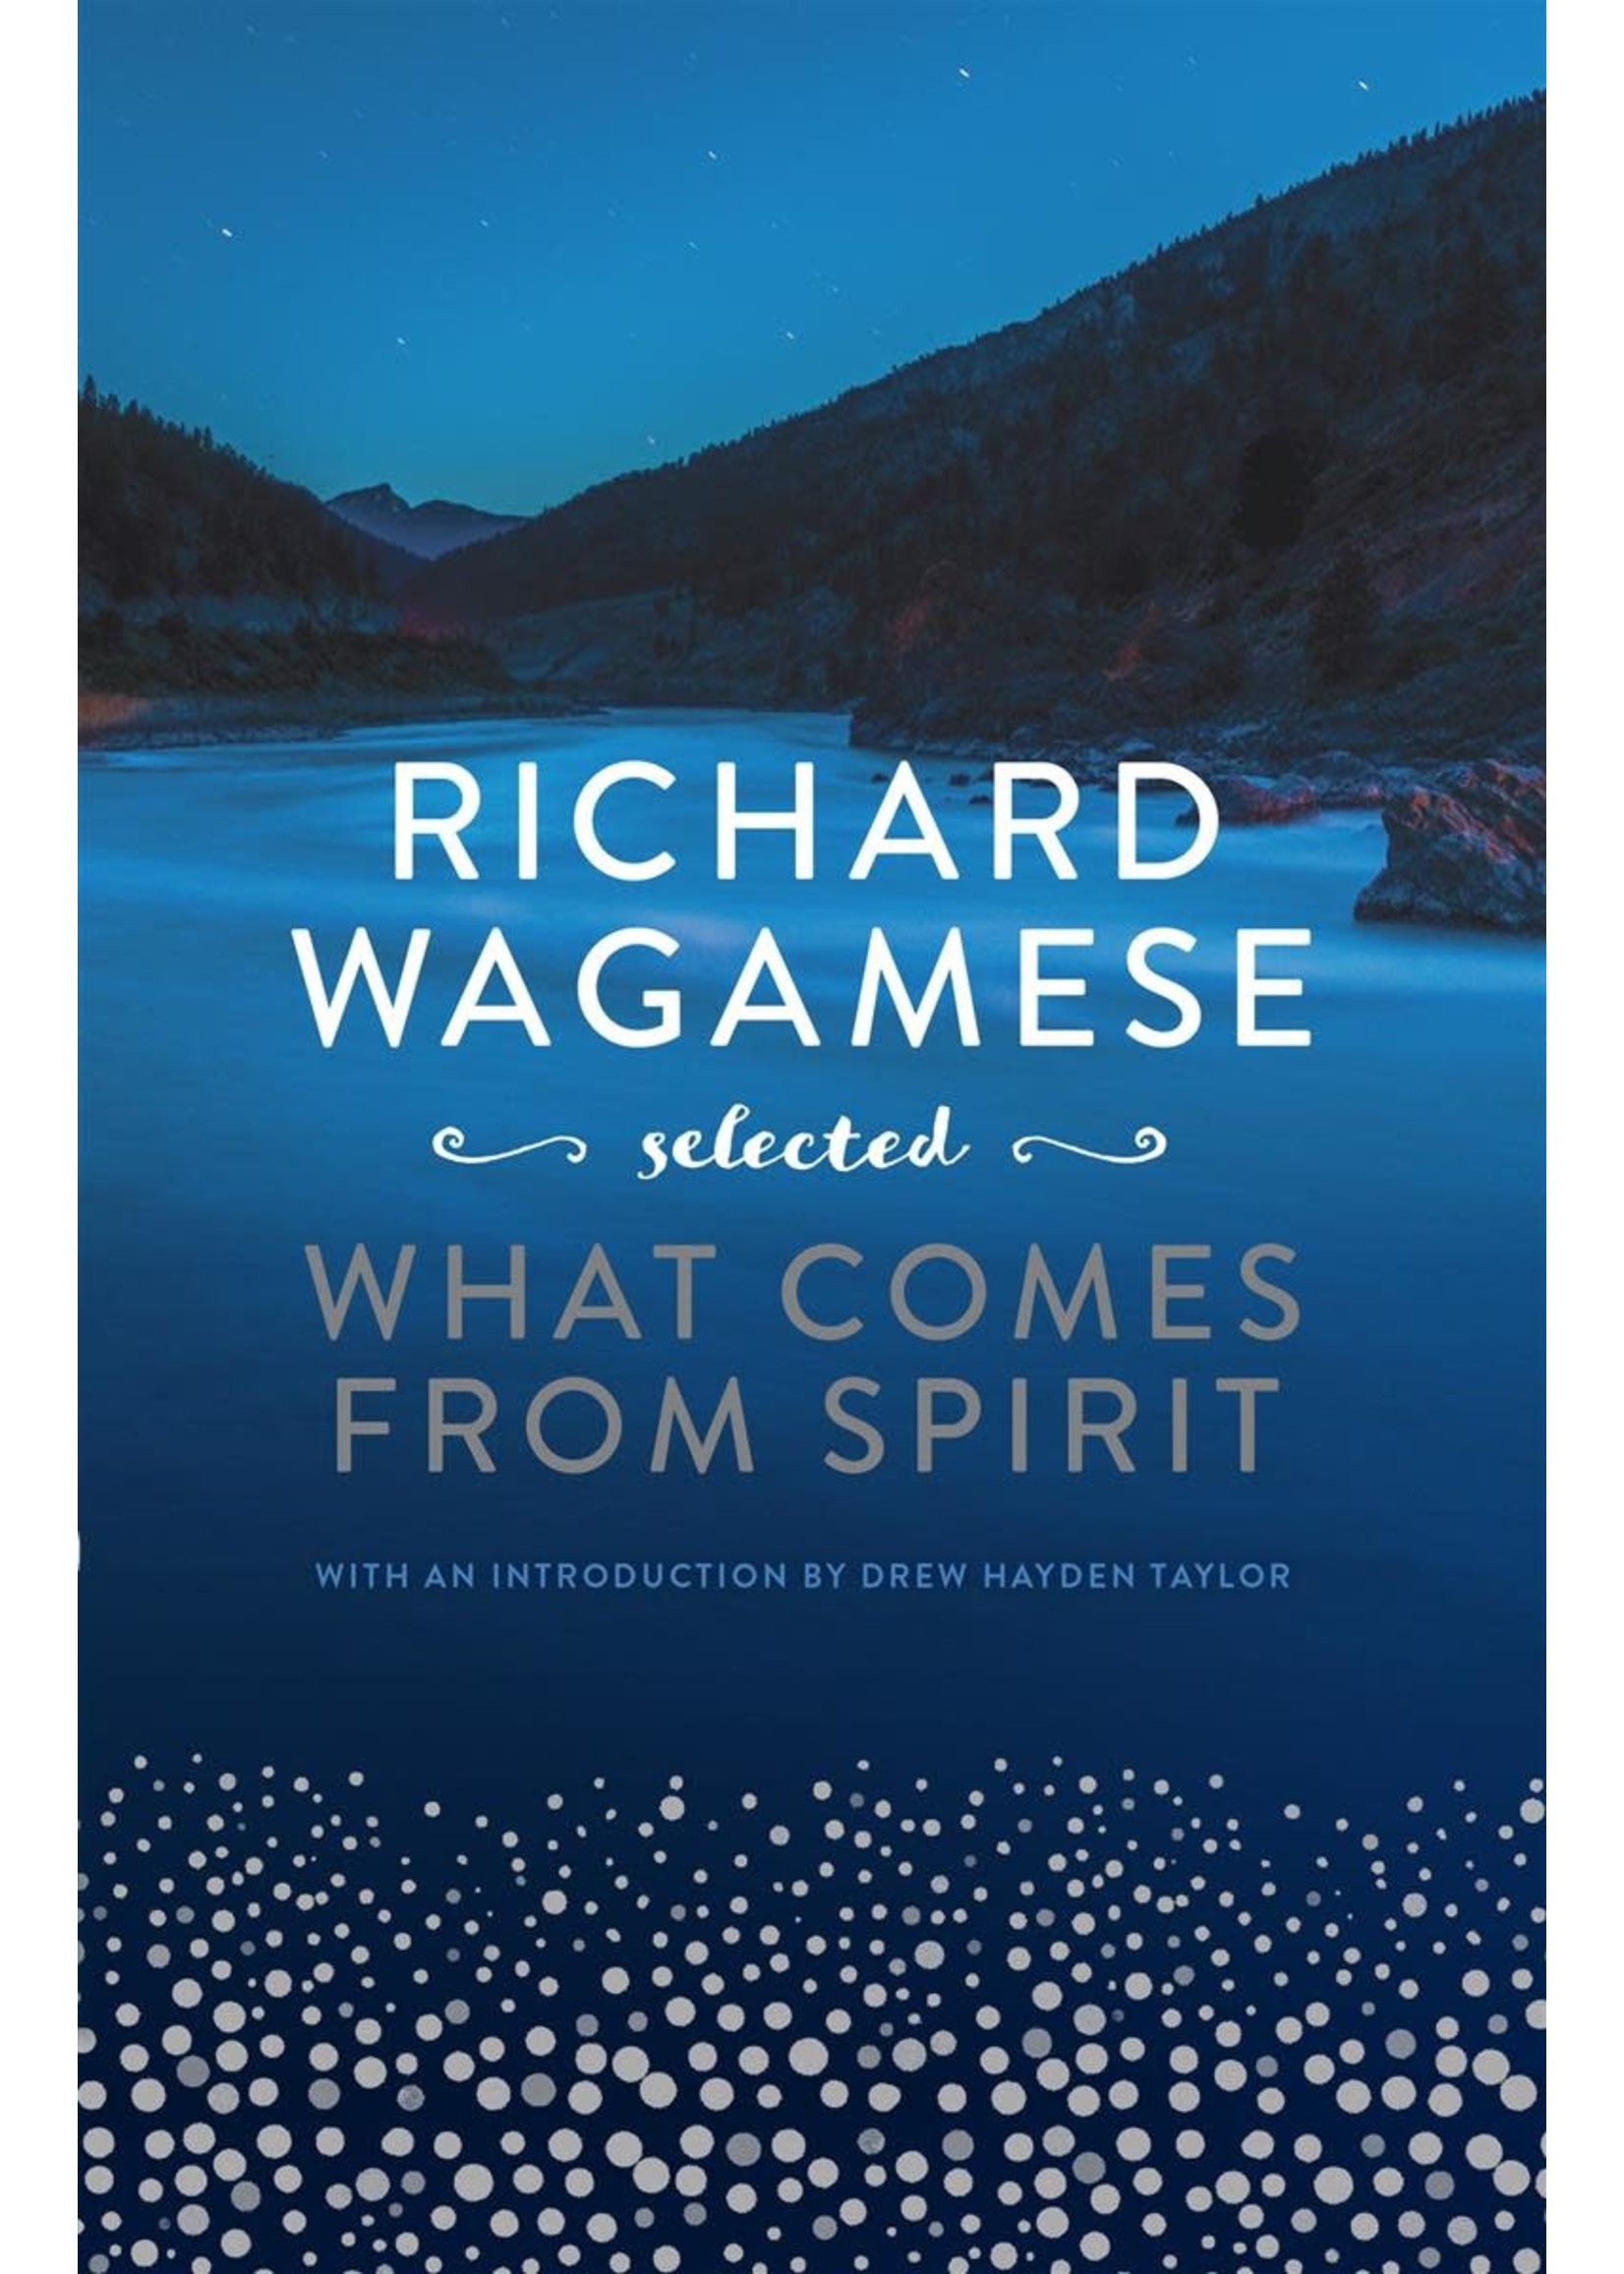 Richard Wagamese Selected: What Comes from Spirit by Richard Wagamese